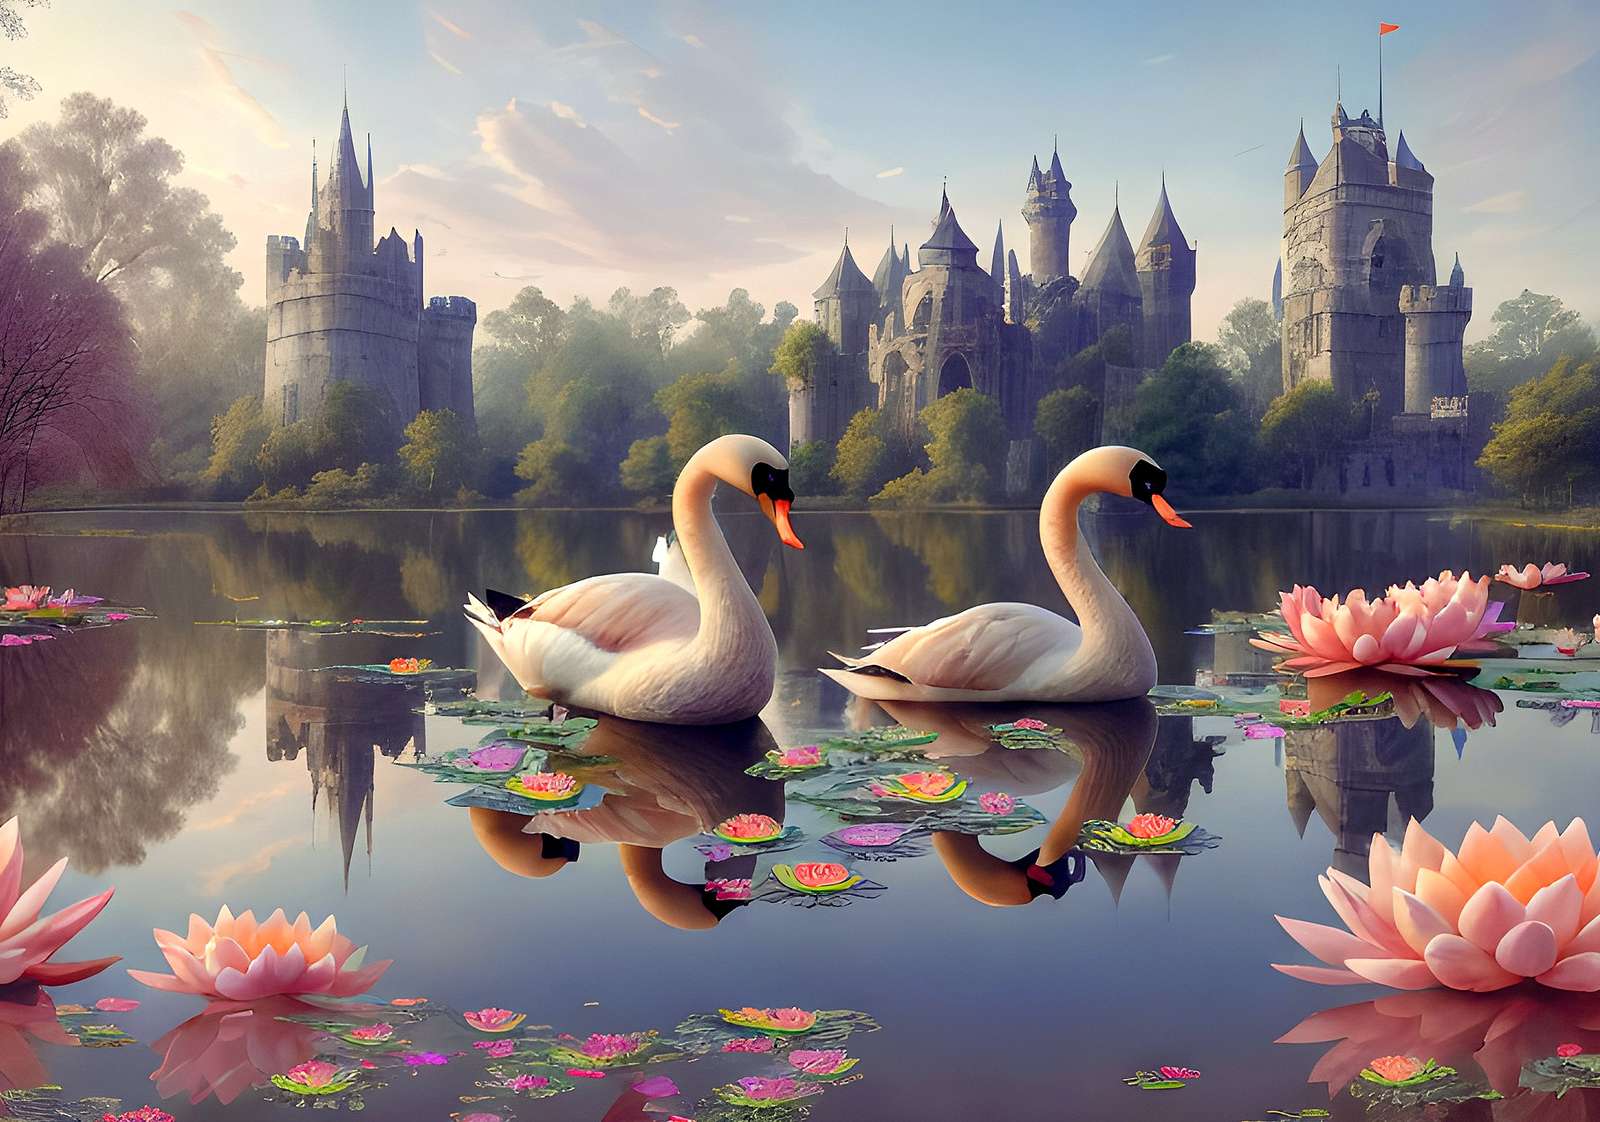 Land of swans (fantasy picture) jigsaw puzzle online